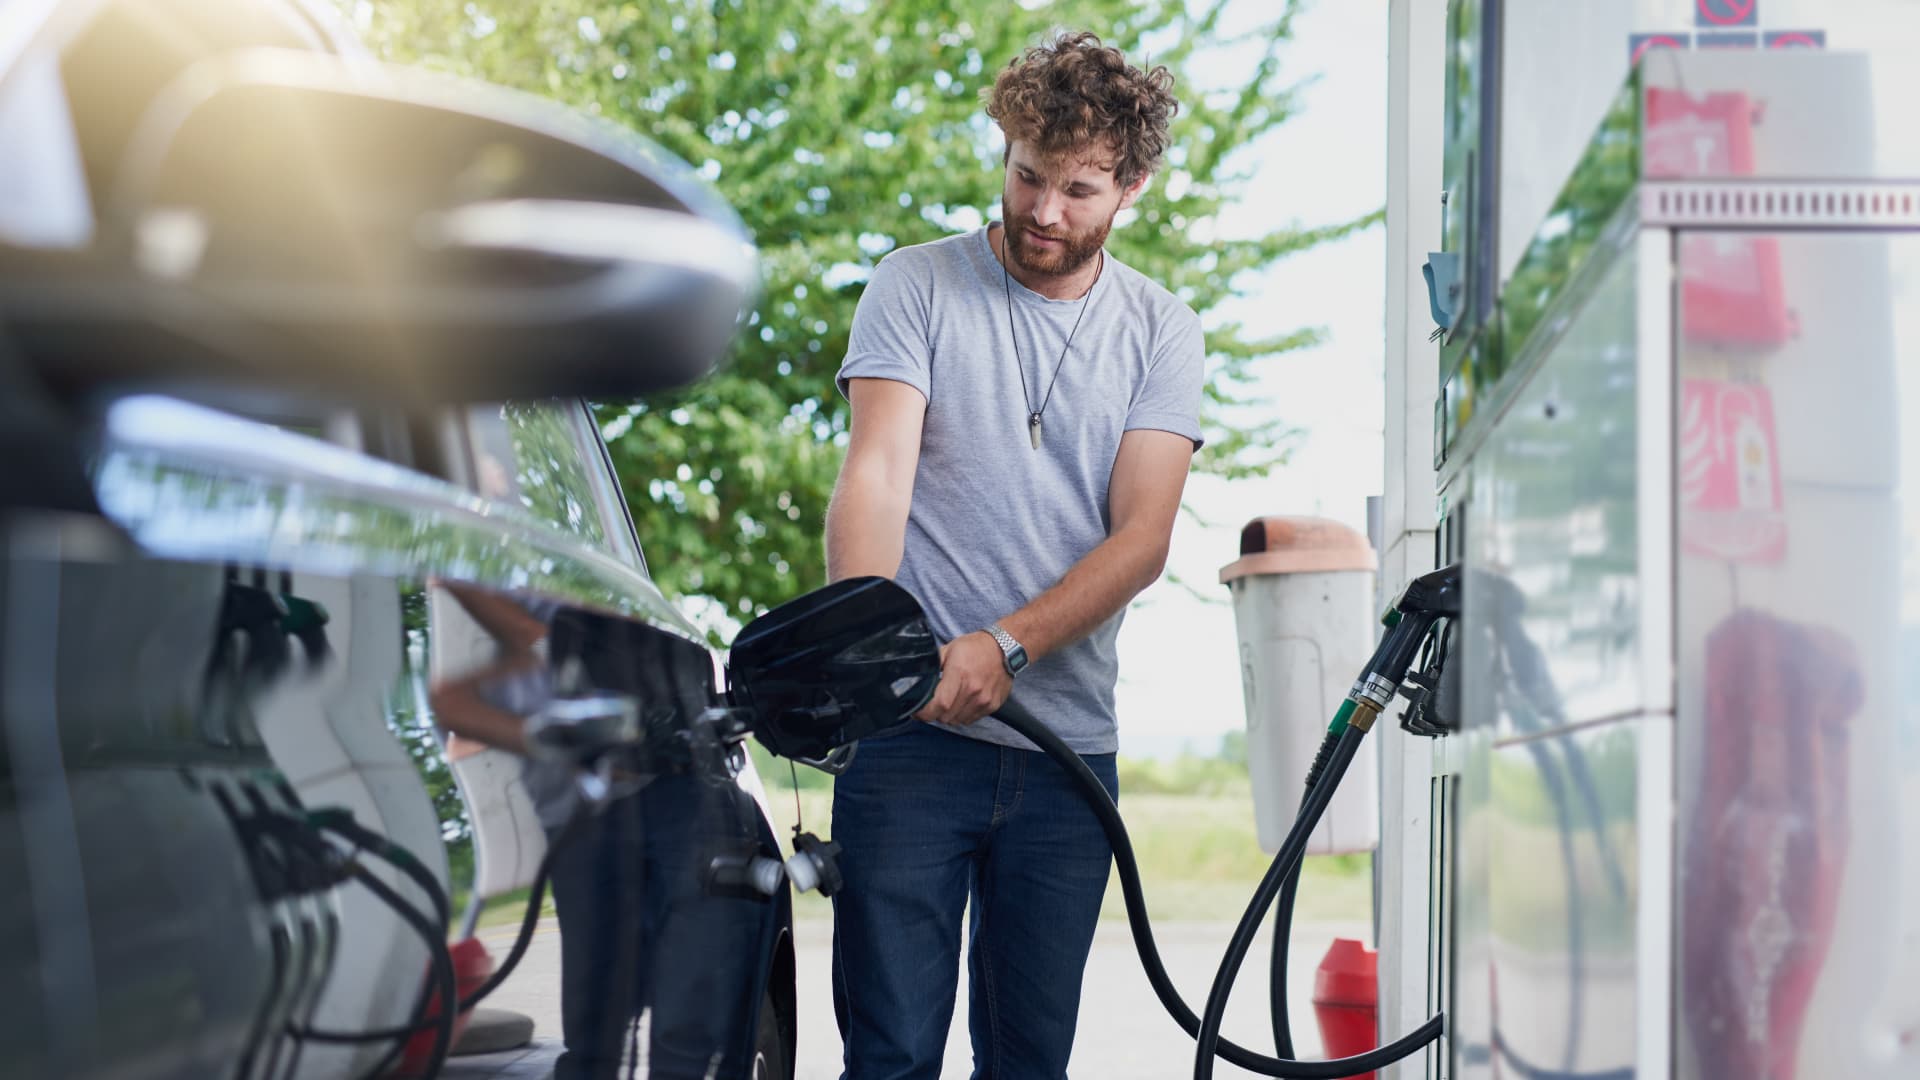 These 5 gas rewards programs that can save you money at the pump